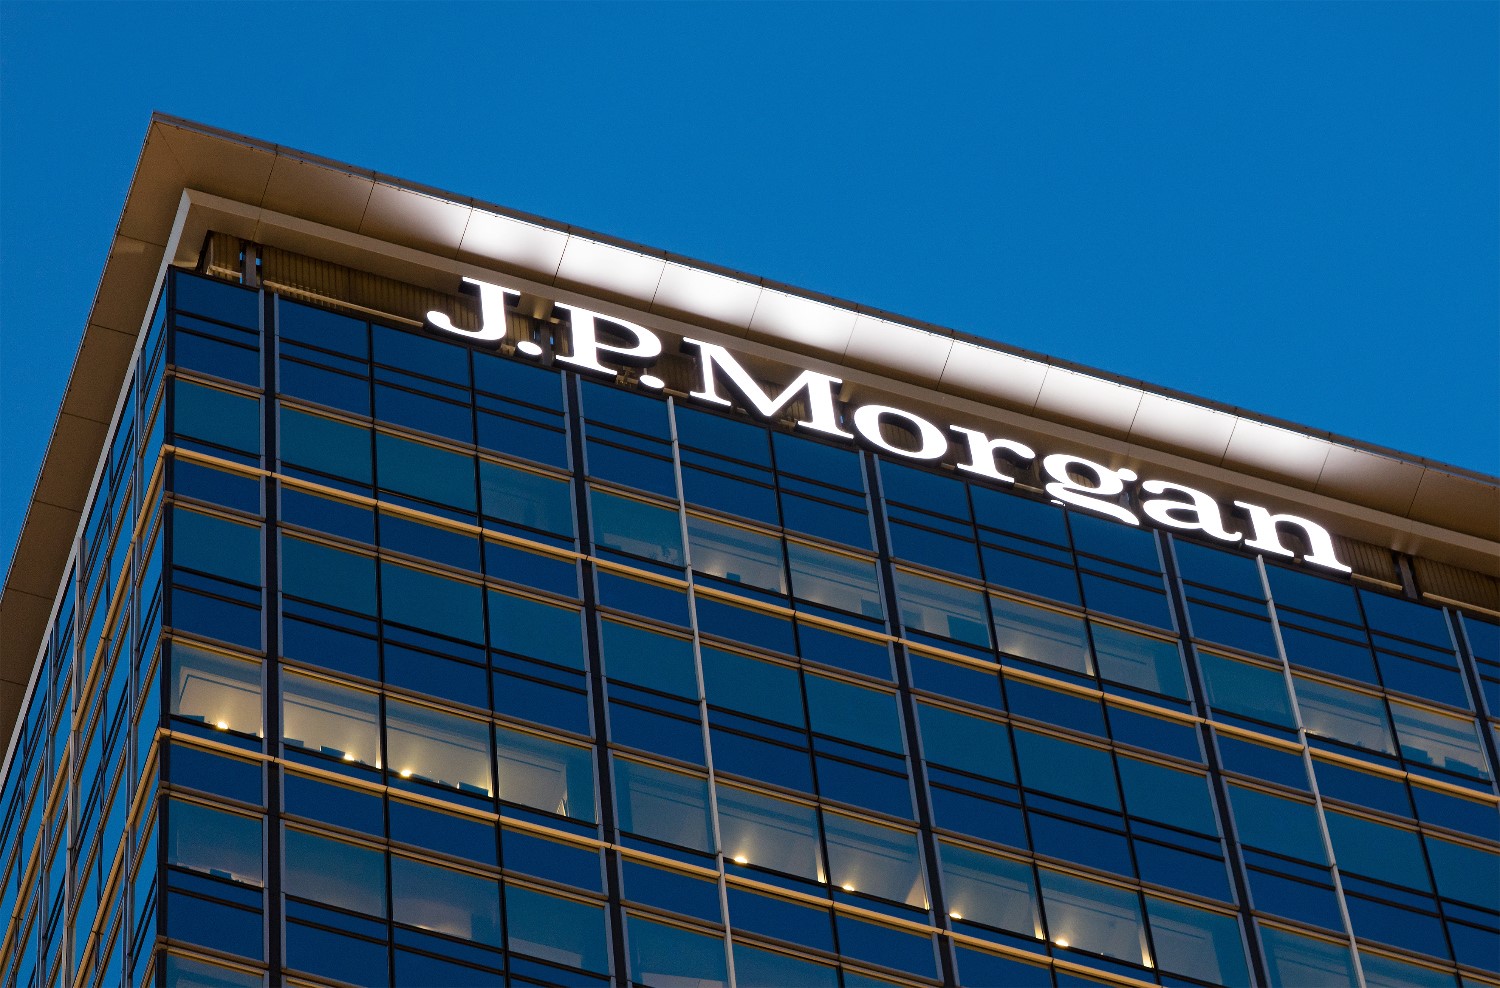 Cryptos Would Only Have Value In ‘Dystopian’ Economy: JPMorgan